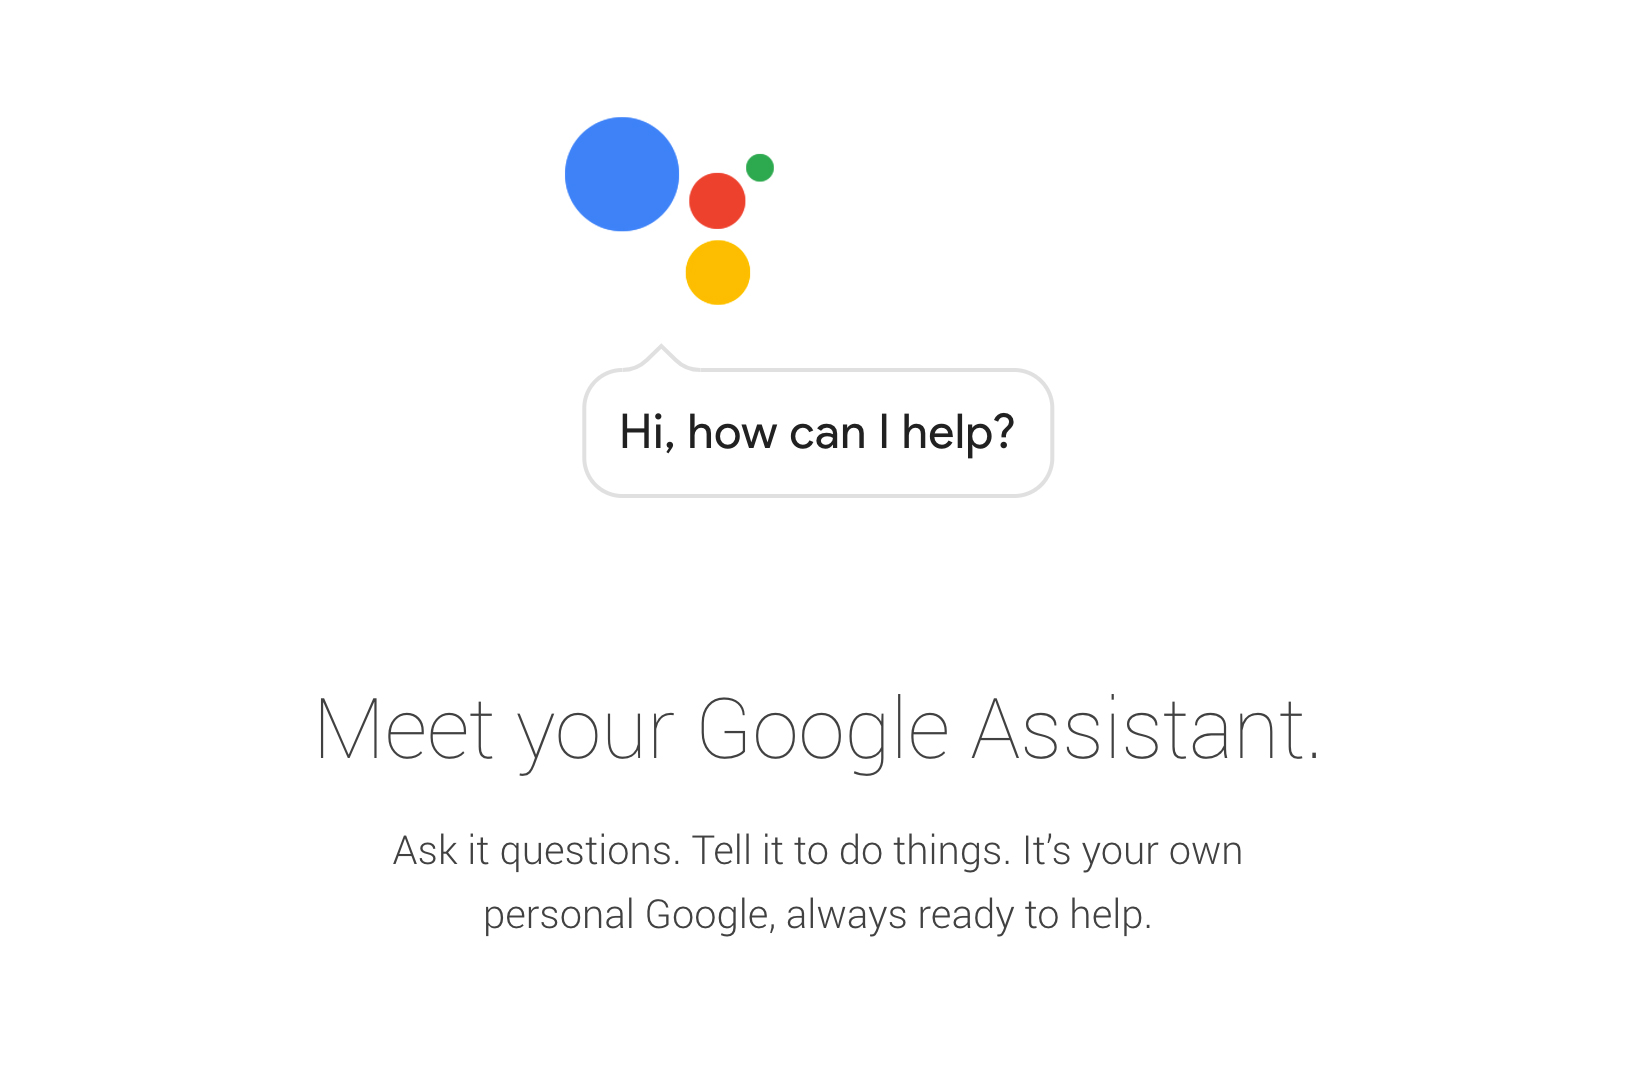 The future of the Google Assistant: Helping you get things done to